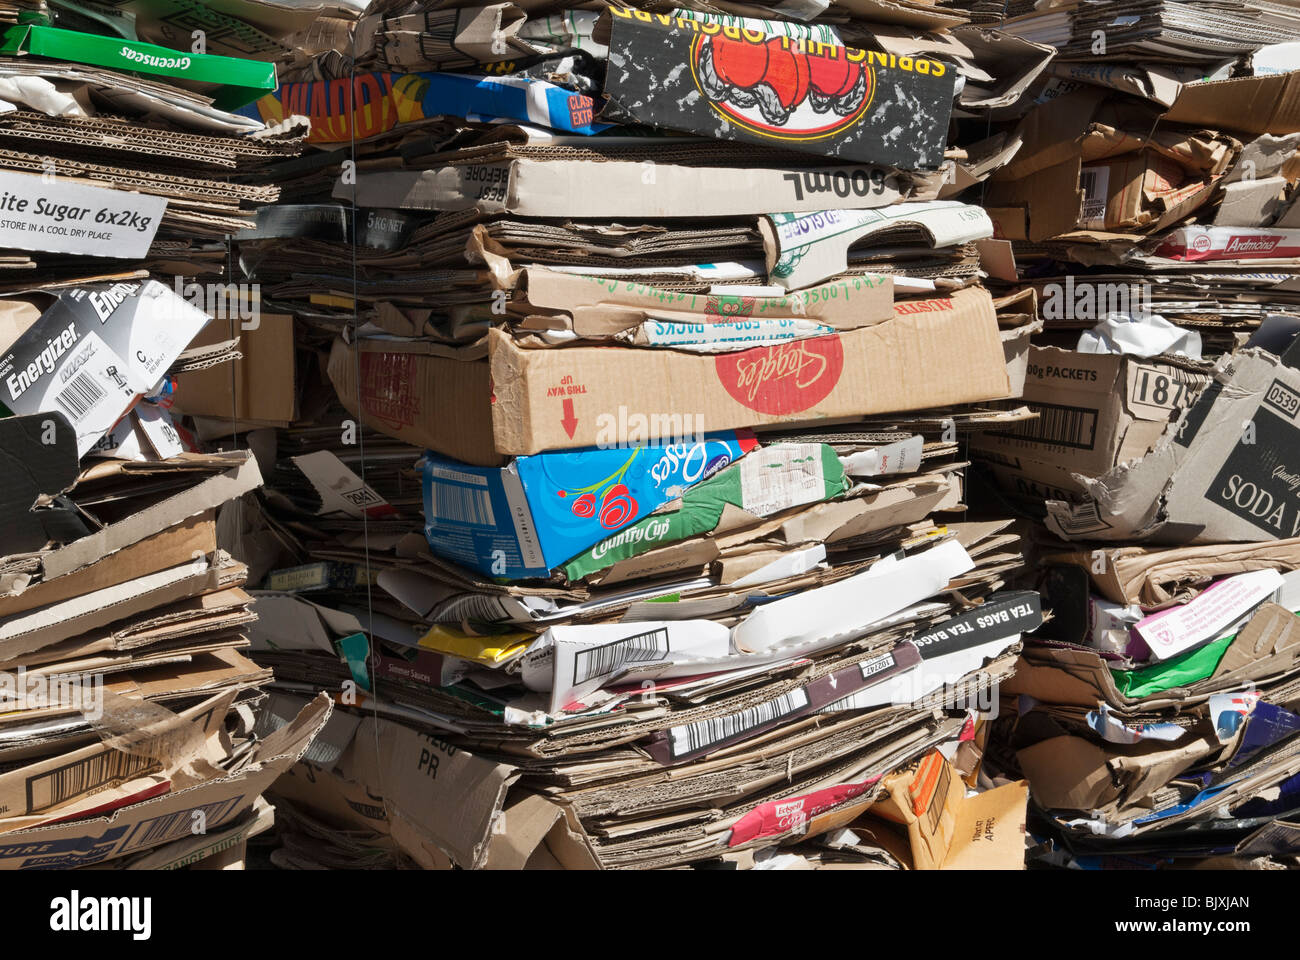 Stacks of cardboard boxes compressed ready for recycling Stock Photo